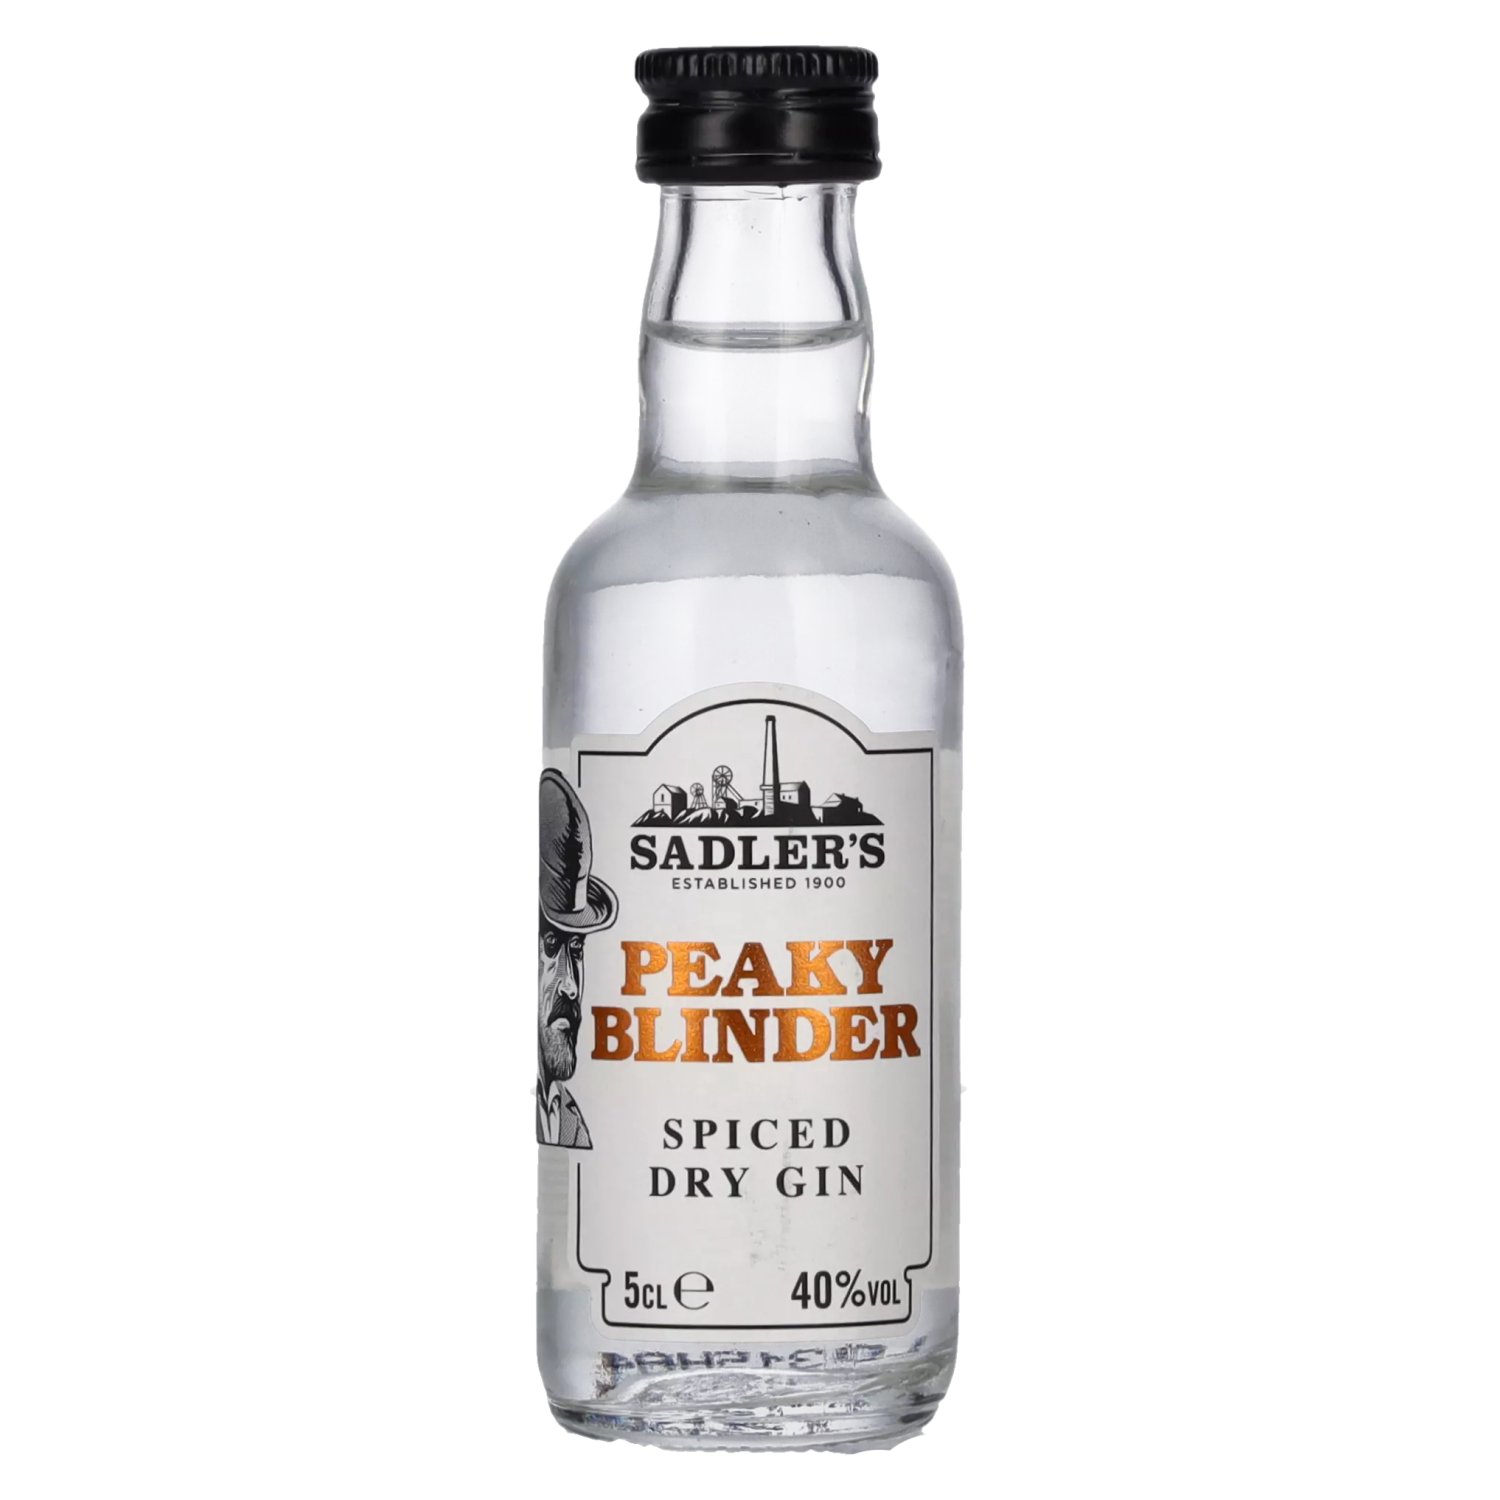 Spiced Blinder Vol. Gin Peaky 40% 12x0,05l Dry